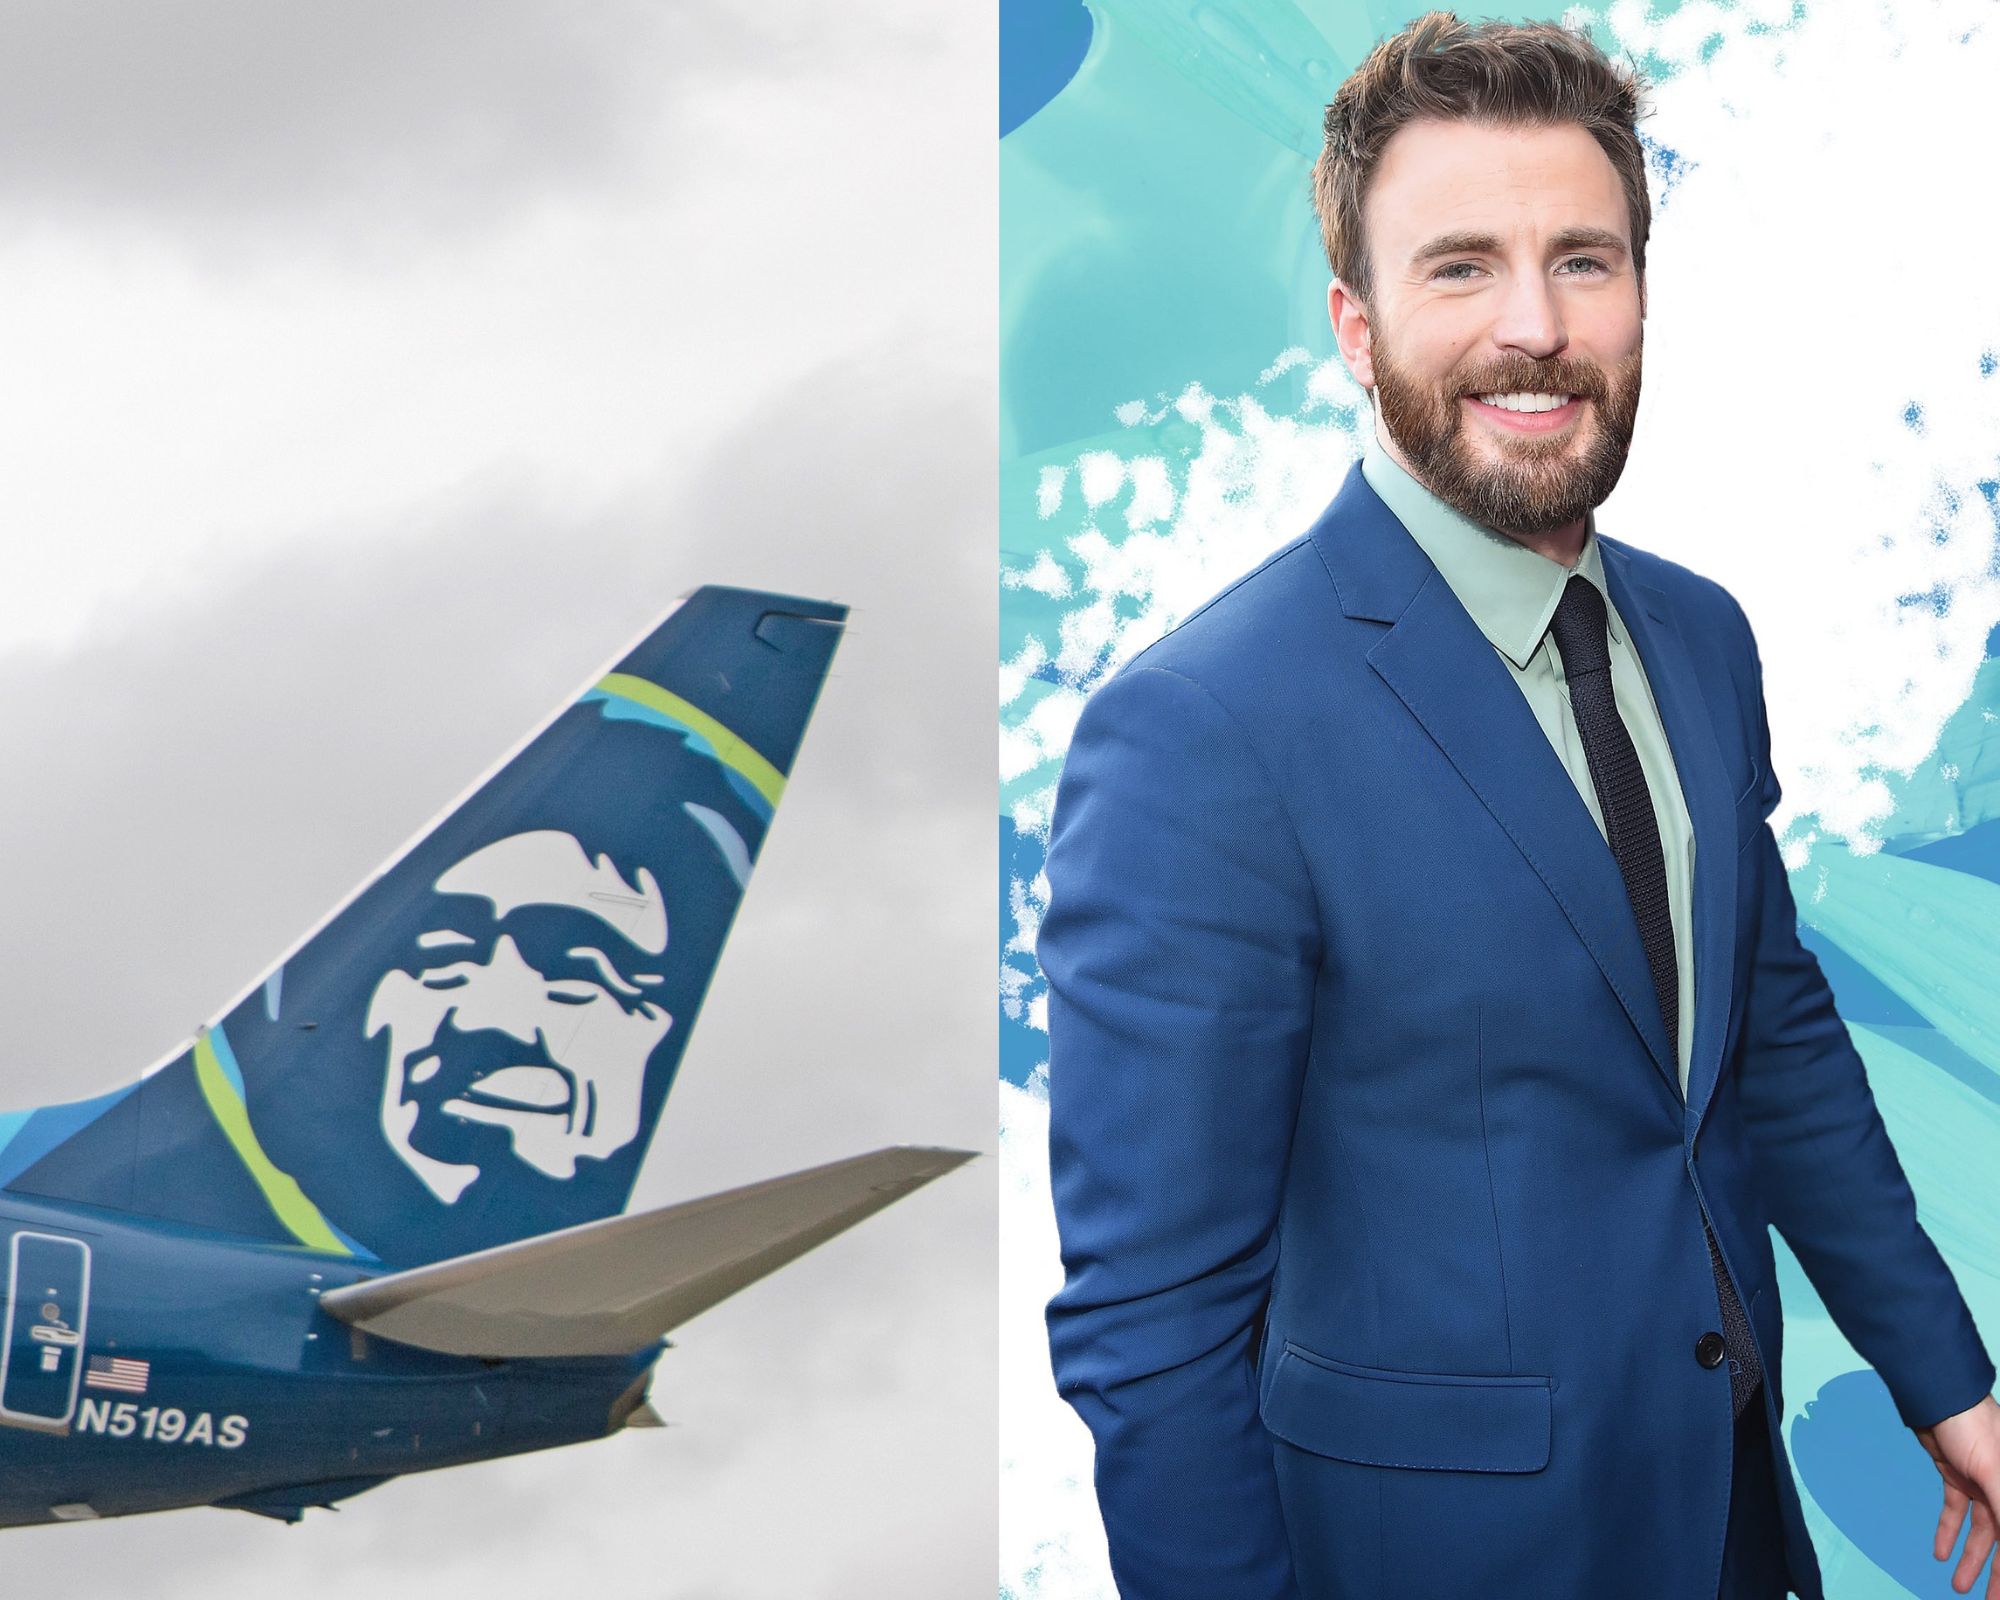 chris evans as airlines mco